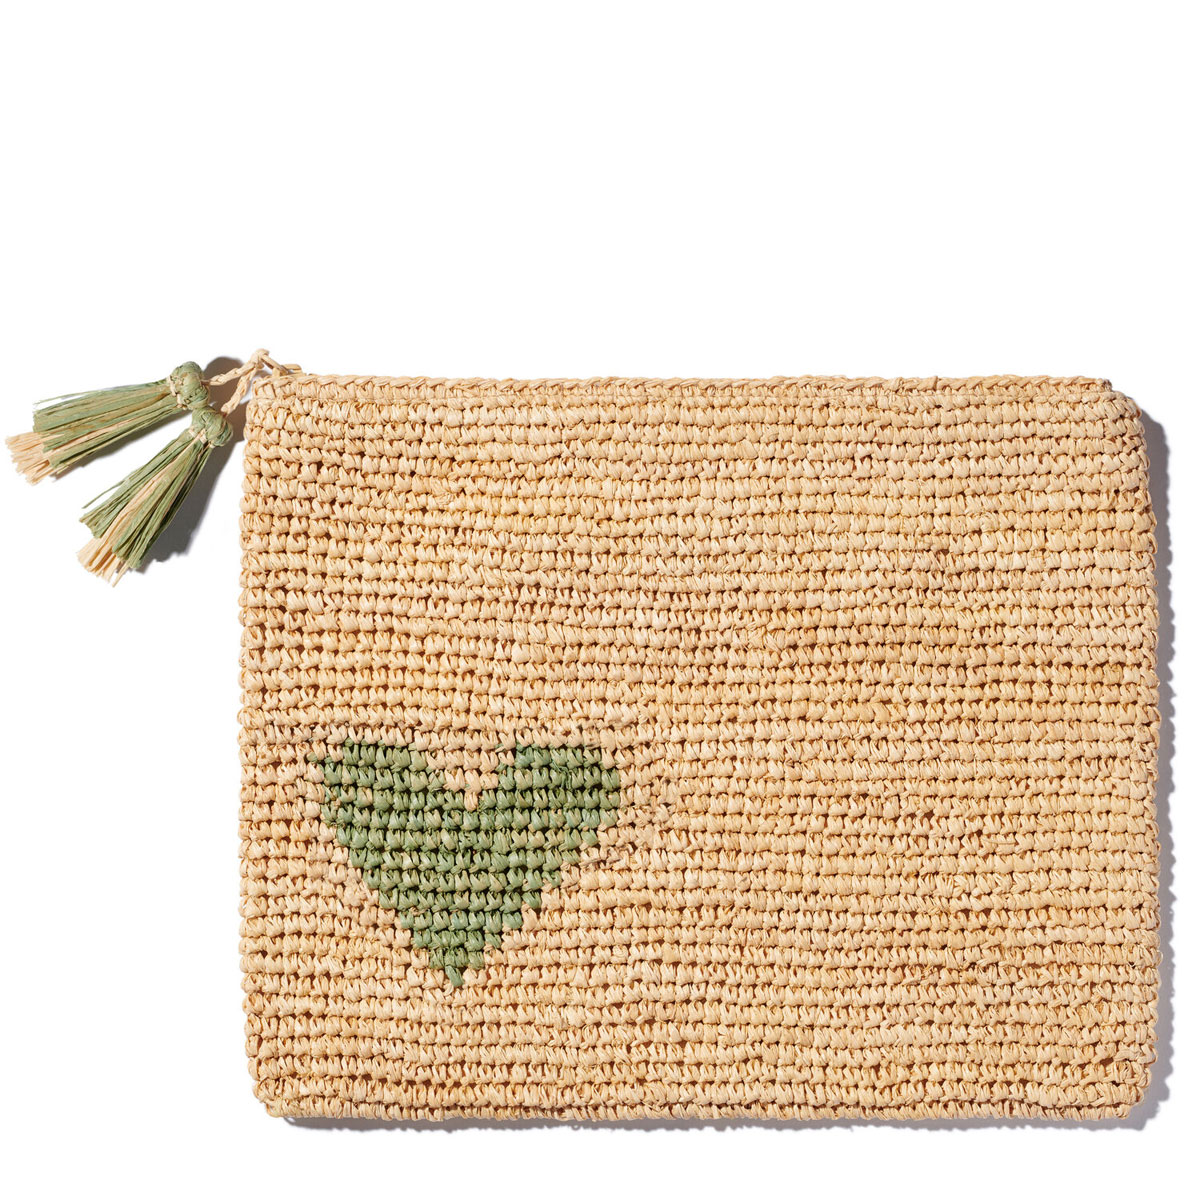 Aerin Heart Raffia Zip-Pouch, Large, Chartreuse